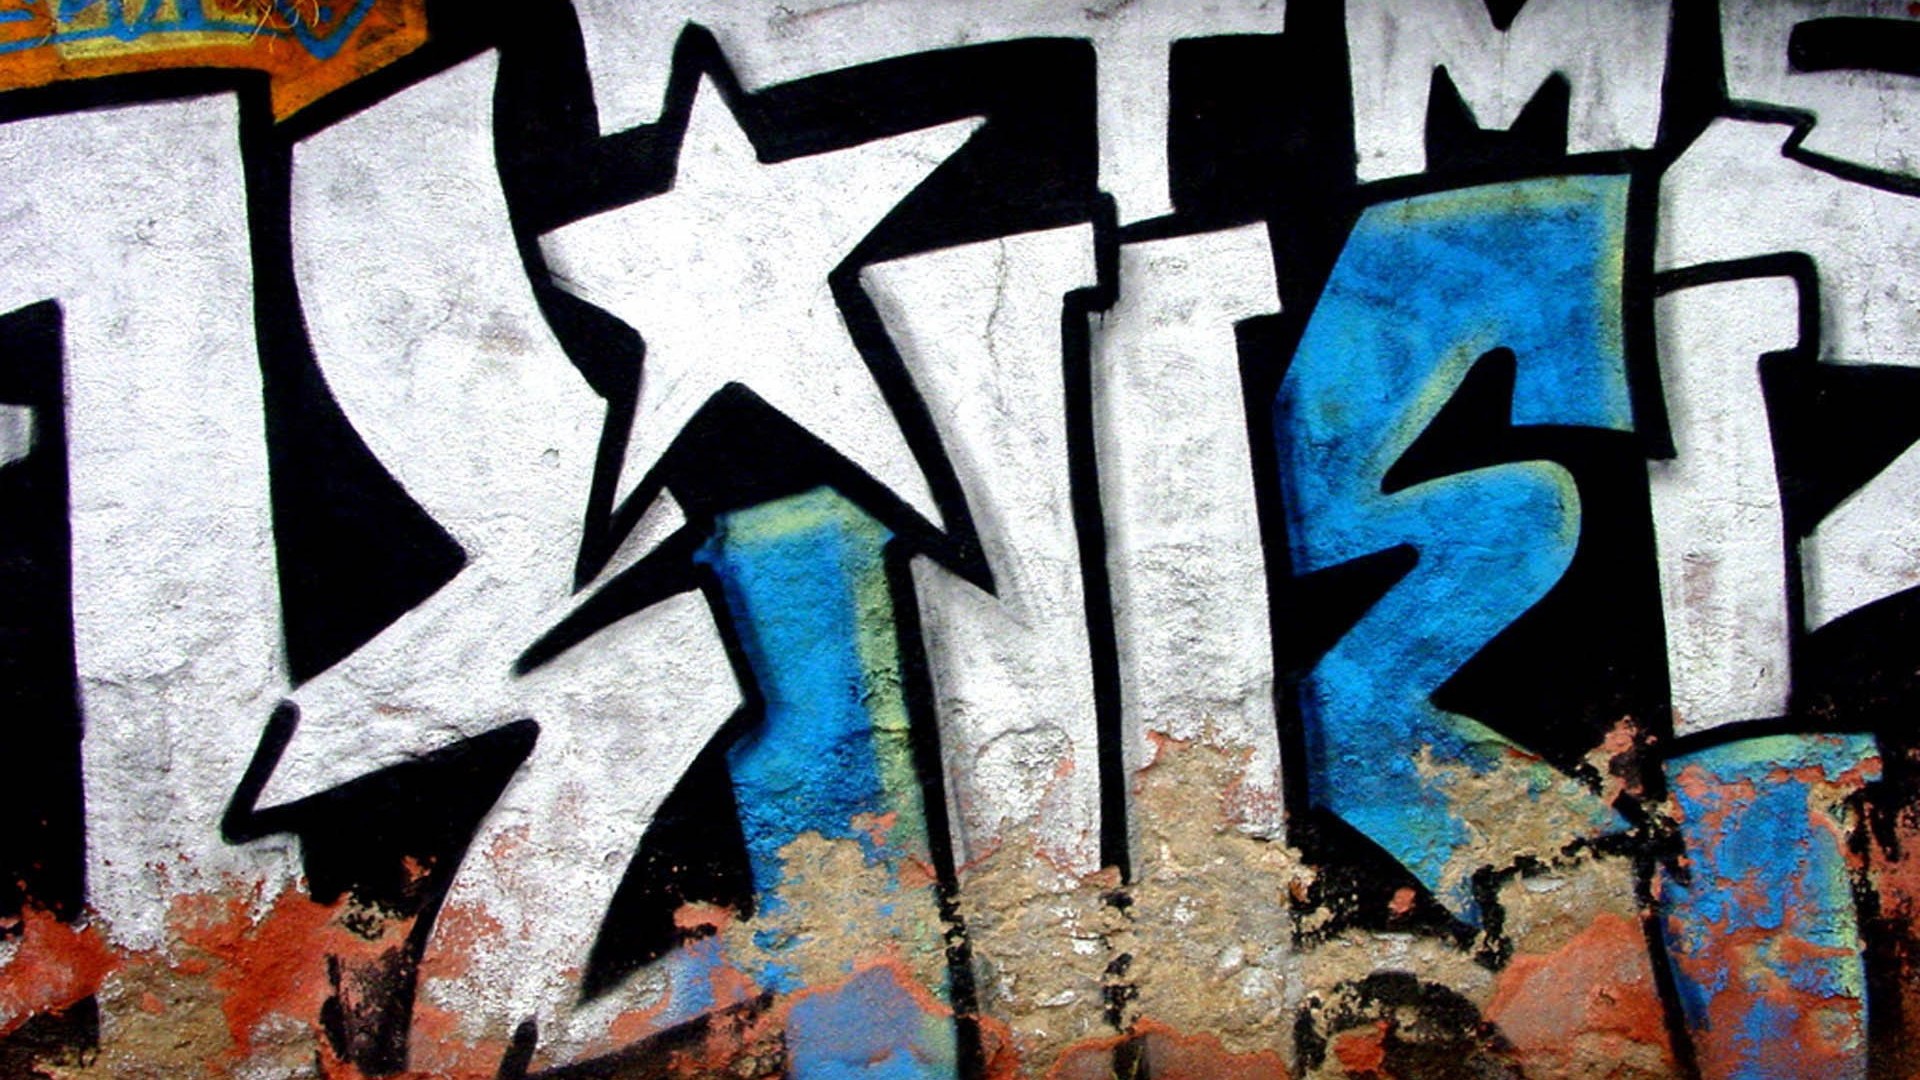 Graffiti Letters Desktop Backgrounds HD with resolution 1920X1080 pixel. You can use this wallpaper as background for your desktop Computer Screensavers, Android or iPhone smartphones